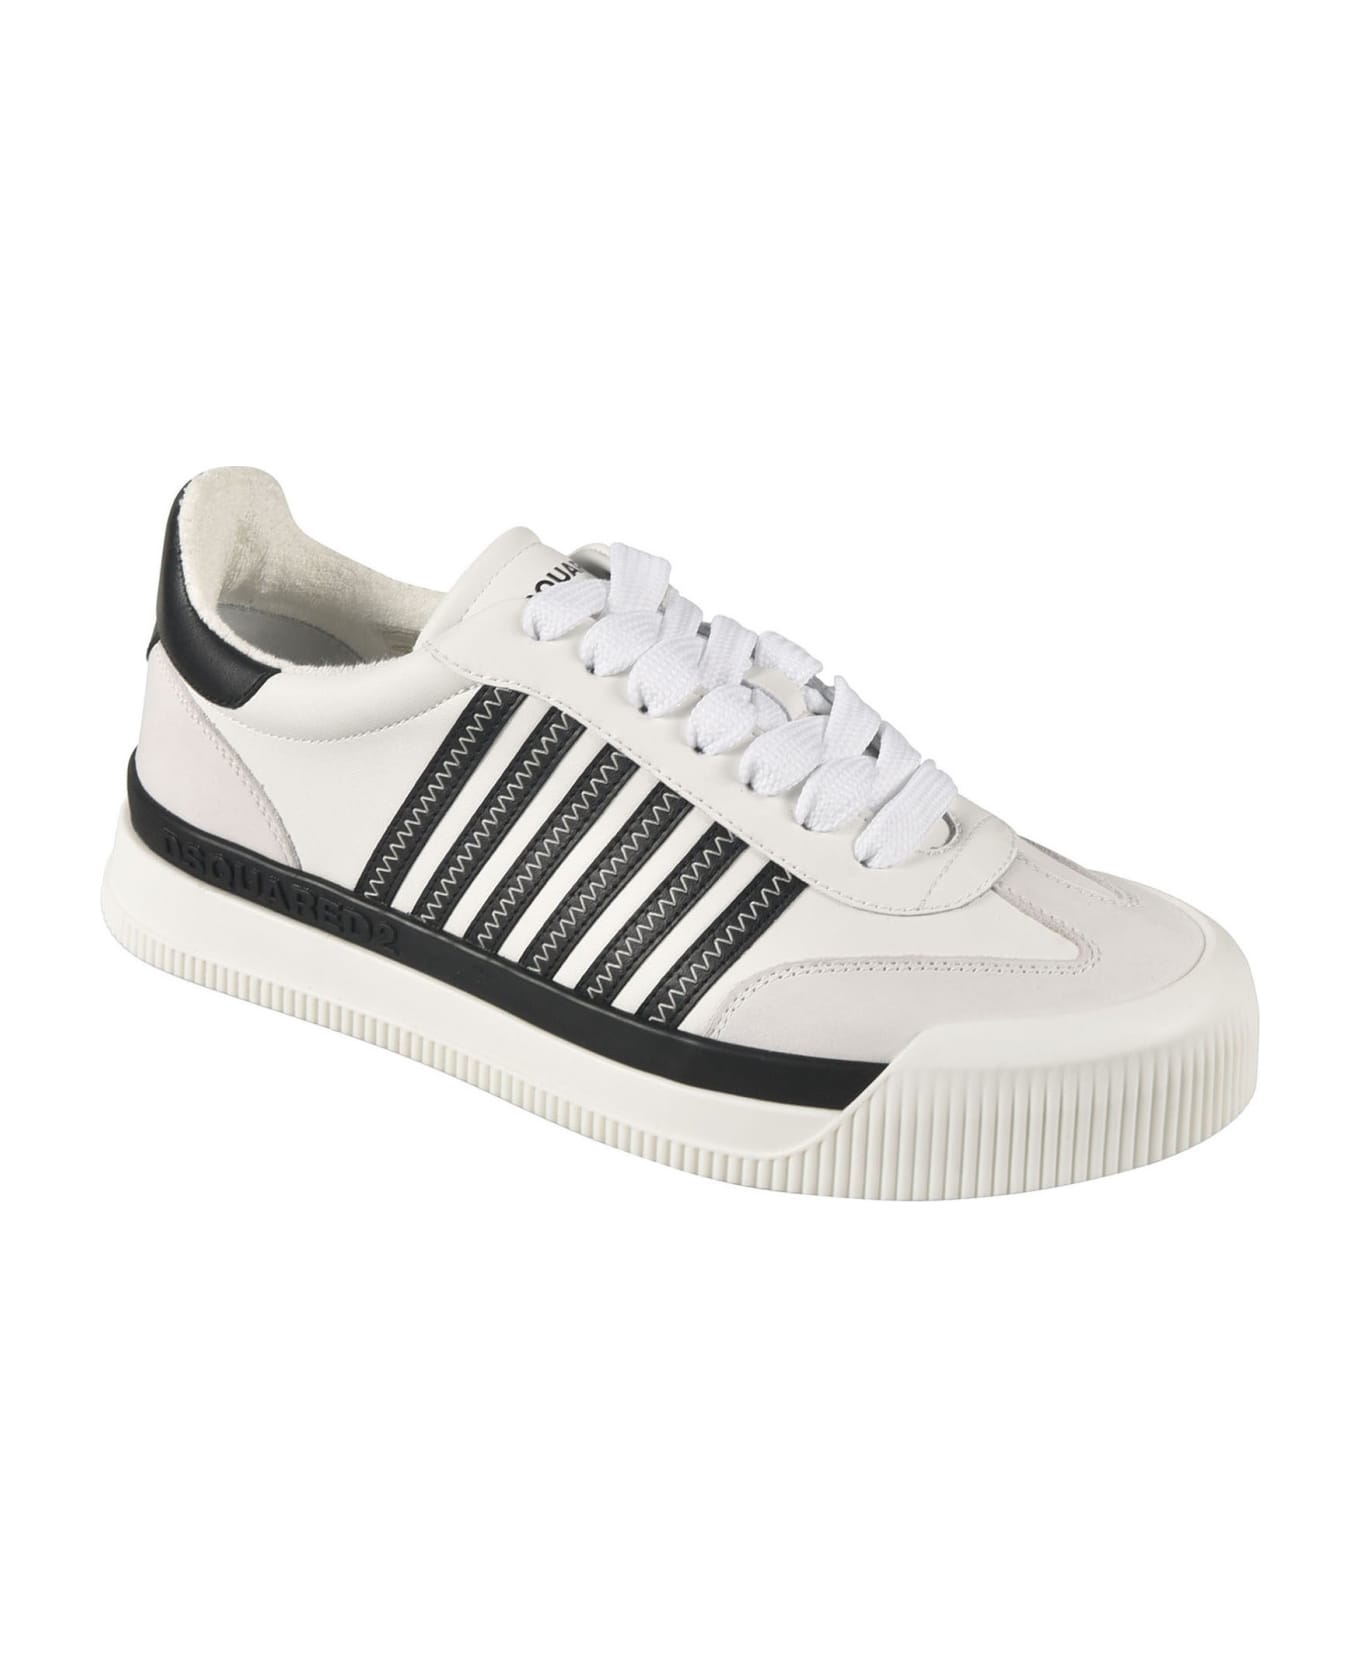 Dsquared2 New Jersey Sneakers - White/Black スニーカー